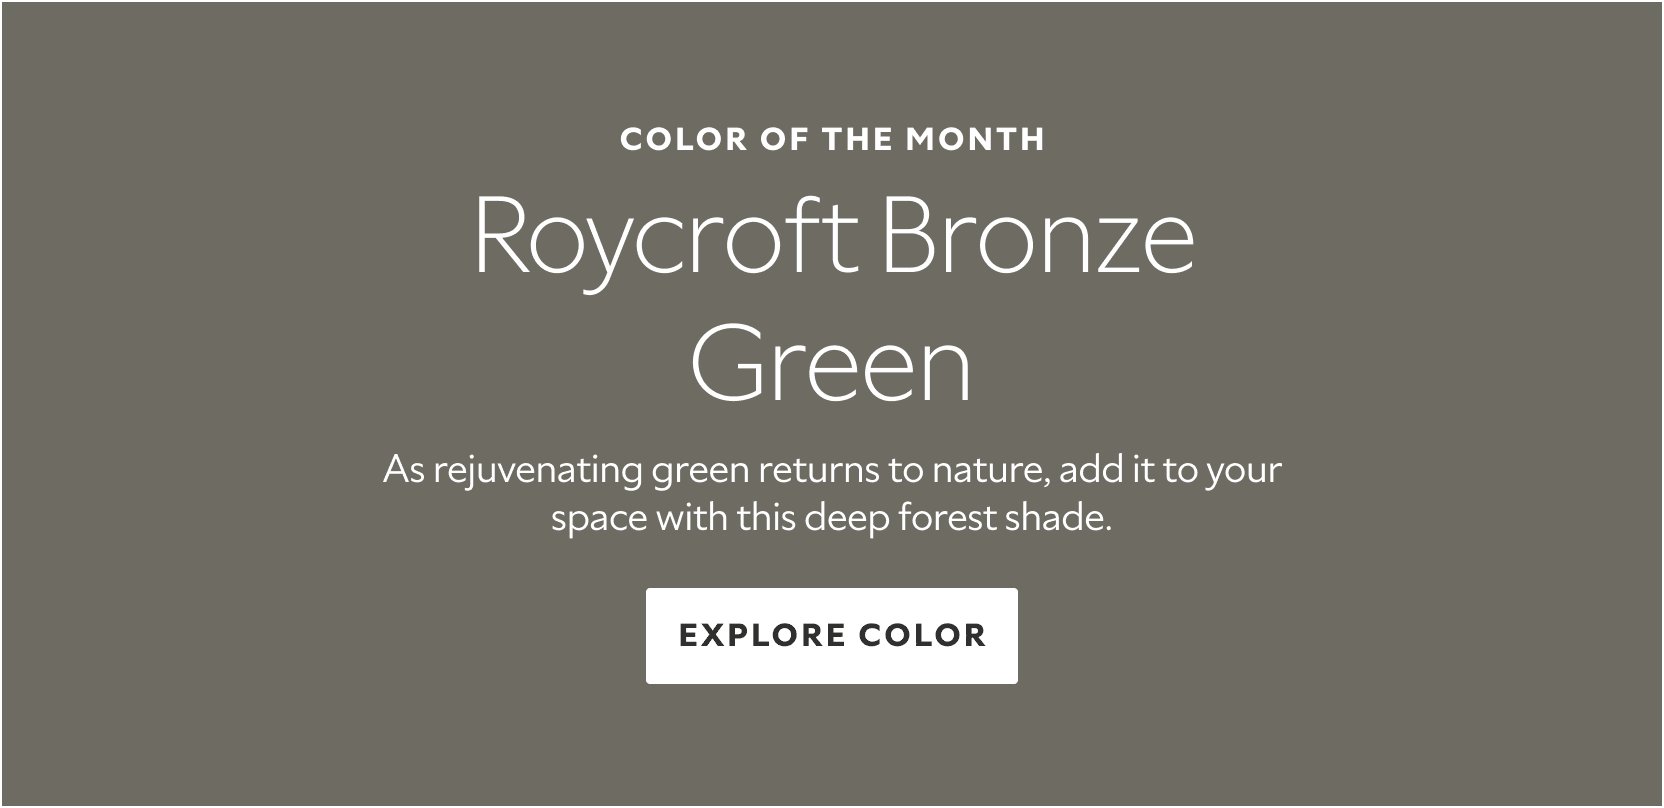 Color or the Month. Roycroft Bronze Green. As rejuvenating green returns to nature, add it to your space with this deep forest shade. Exlpore Color.